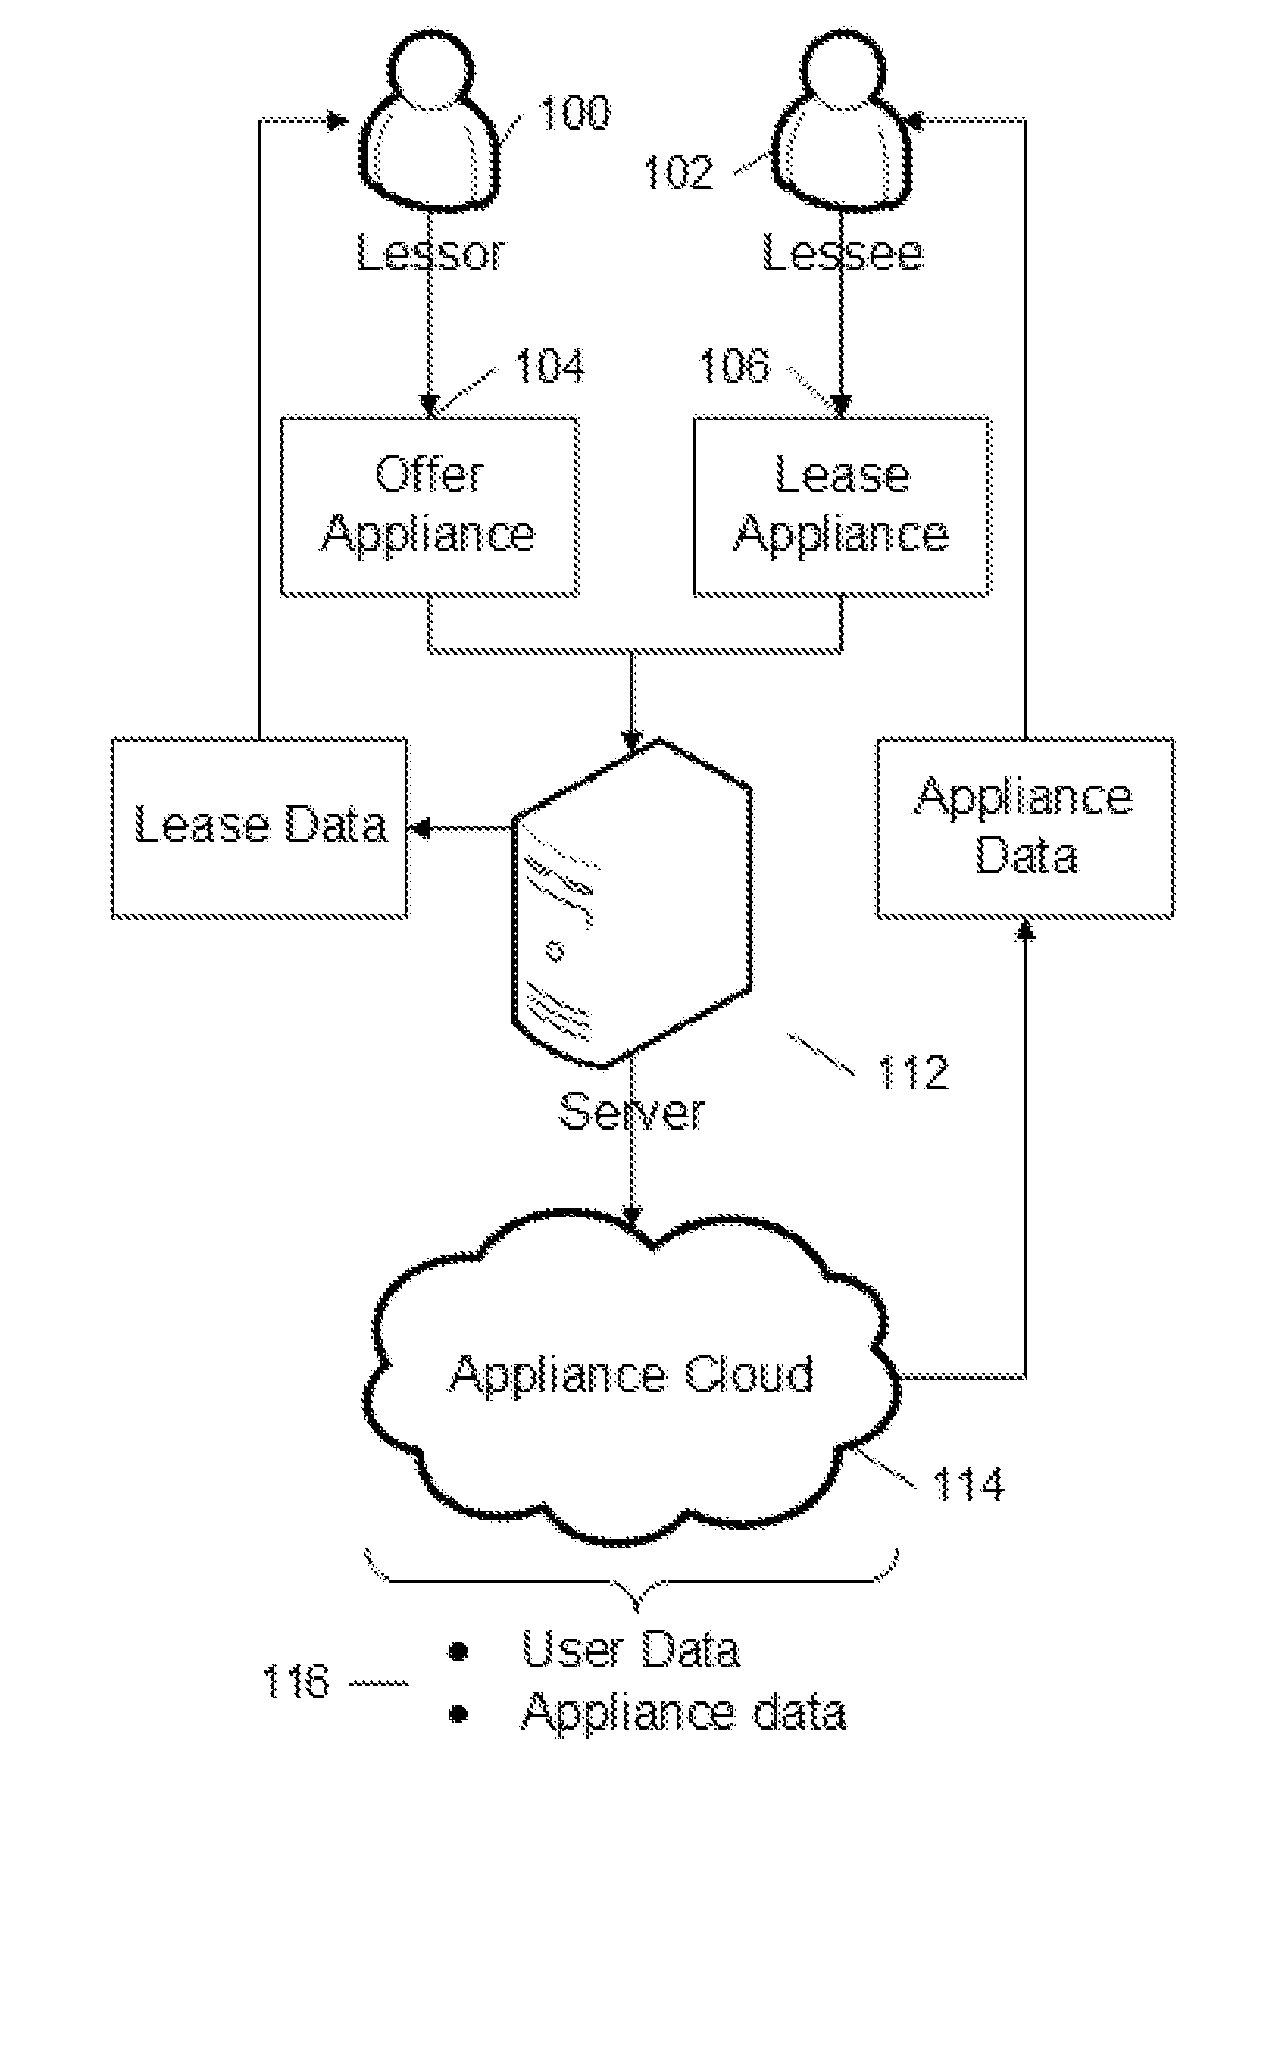 System and method for implementation of sharing economy in a web environment